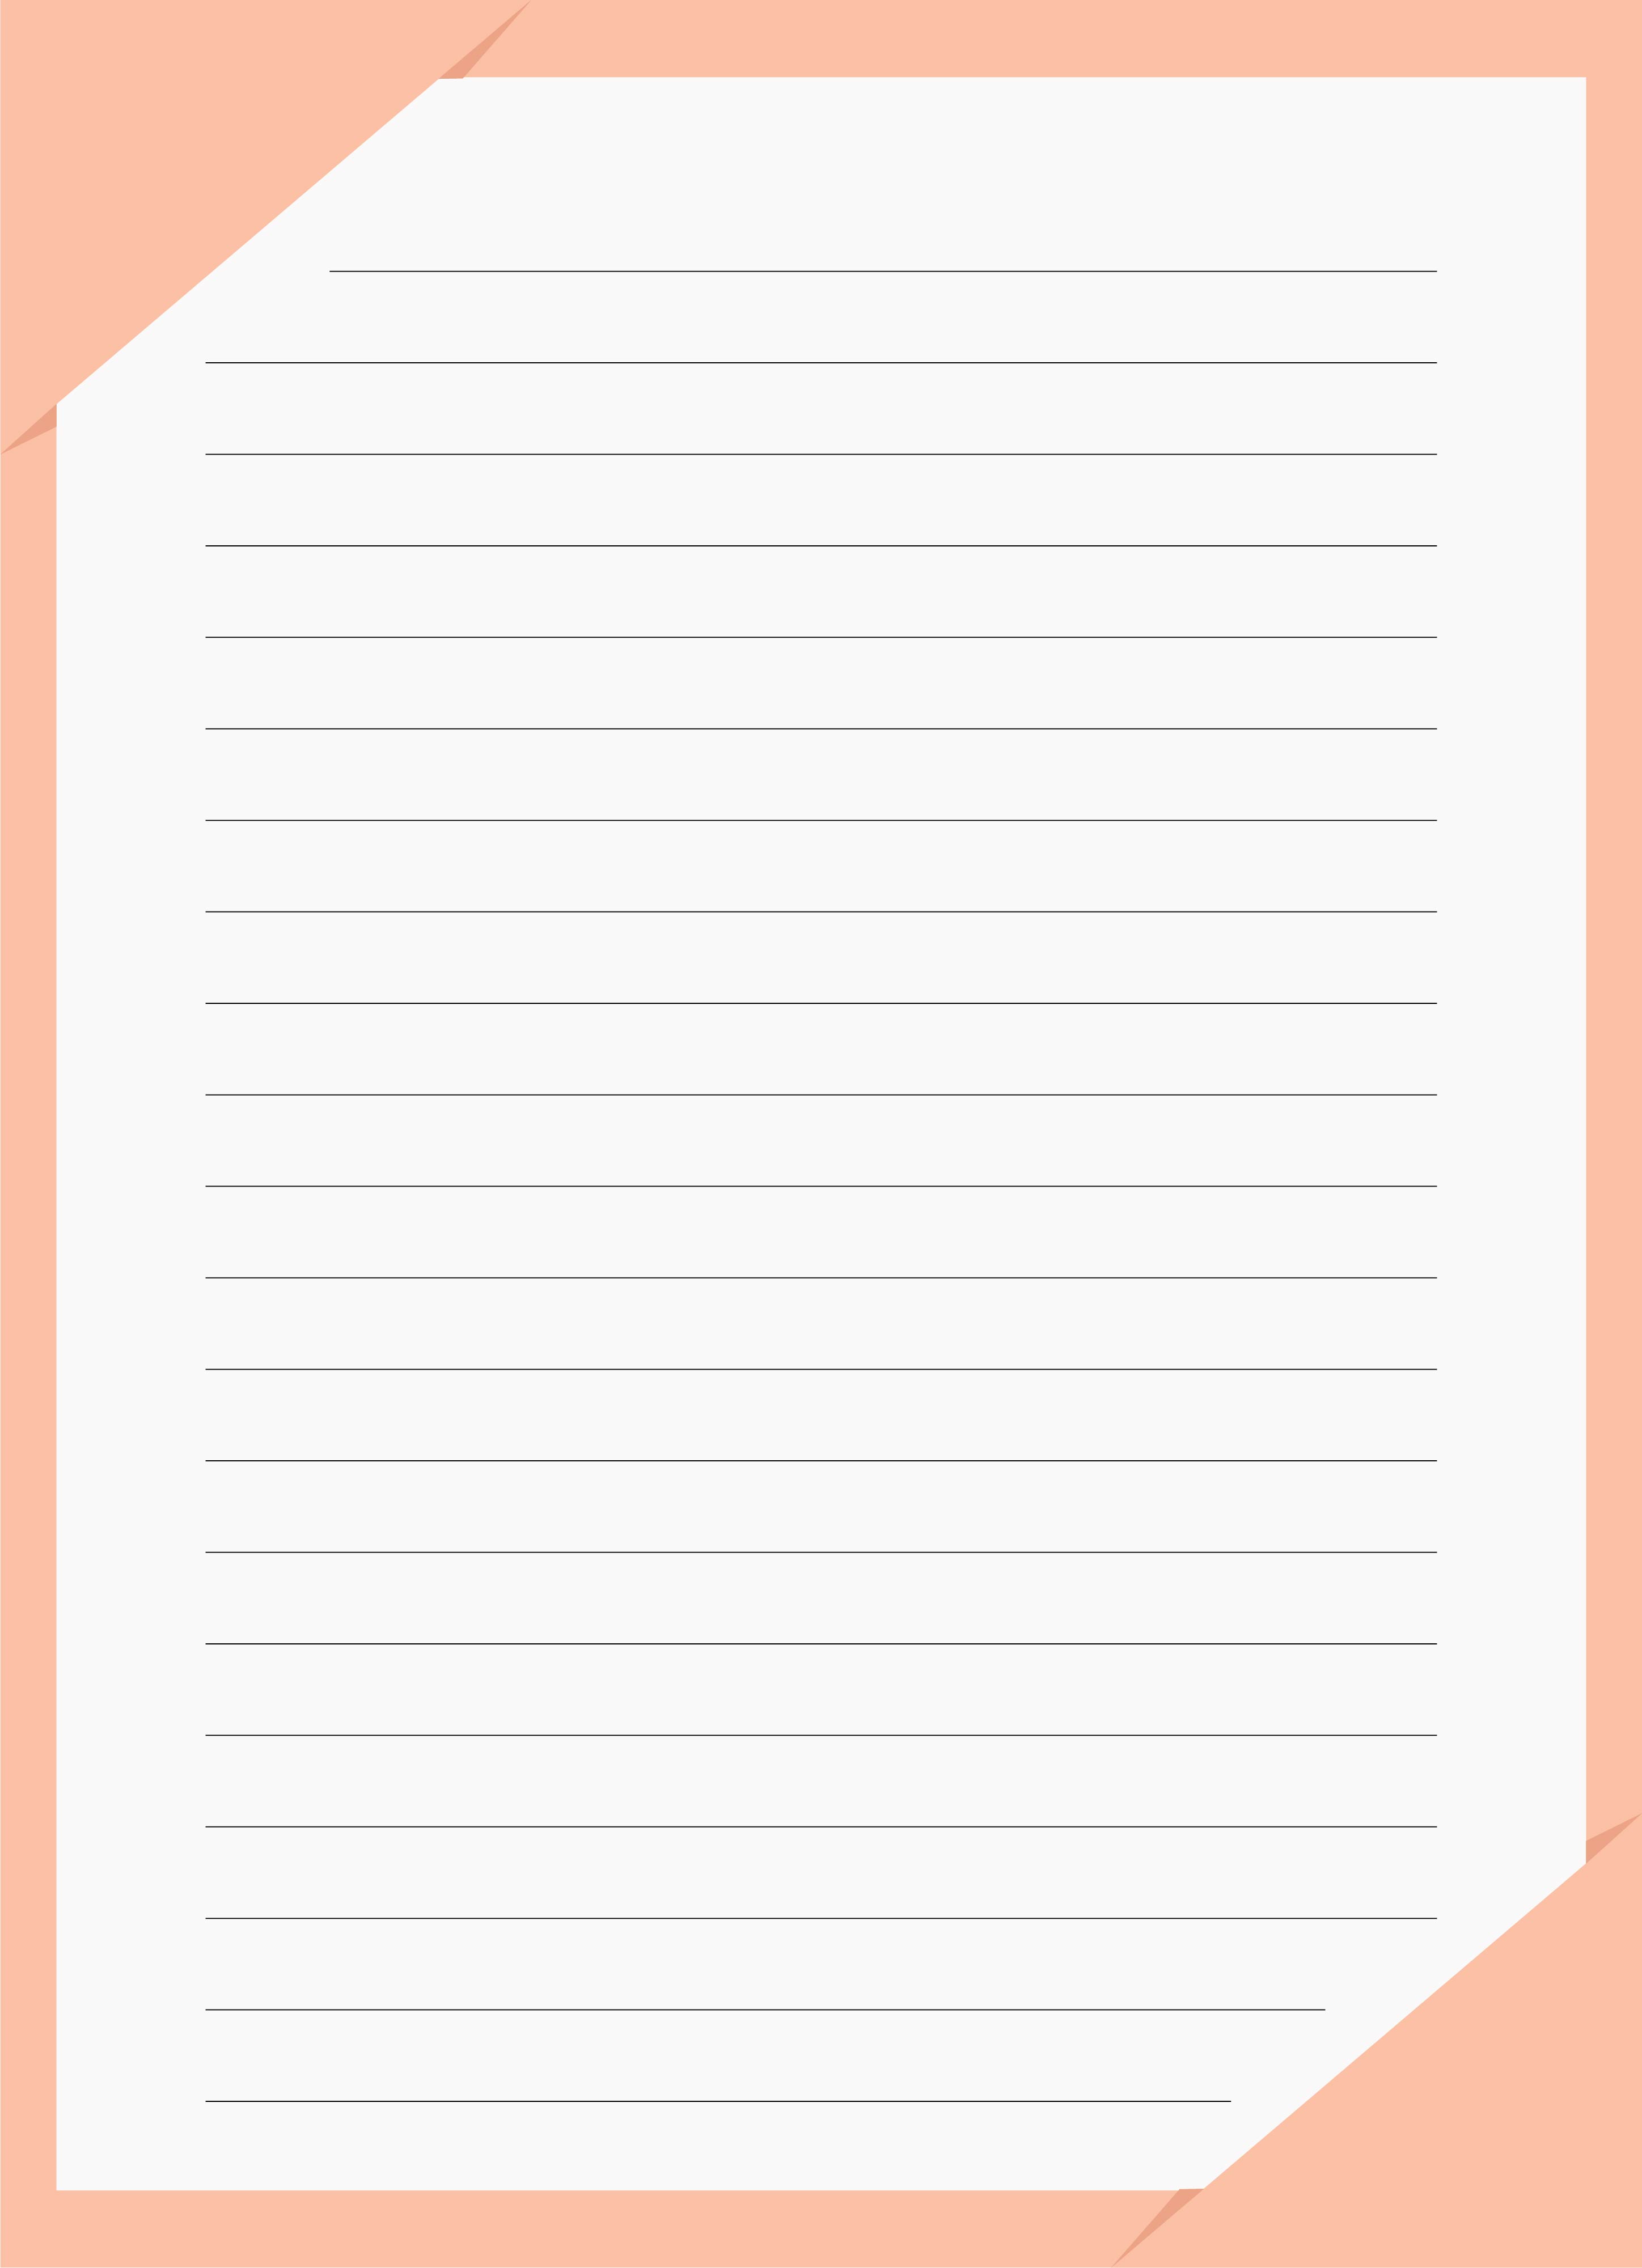 4-best-images-of-free-printable-lined-writing-paper-kids-free